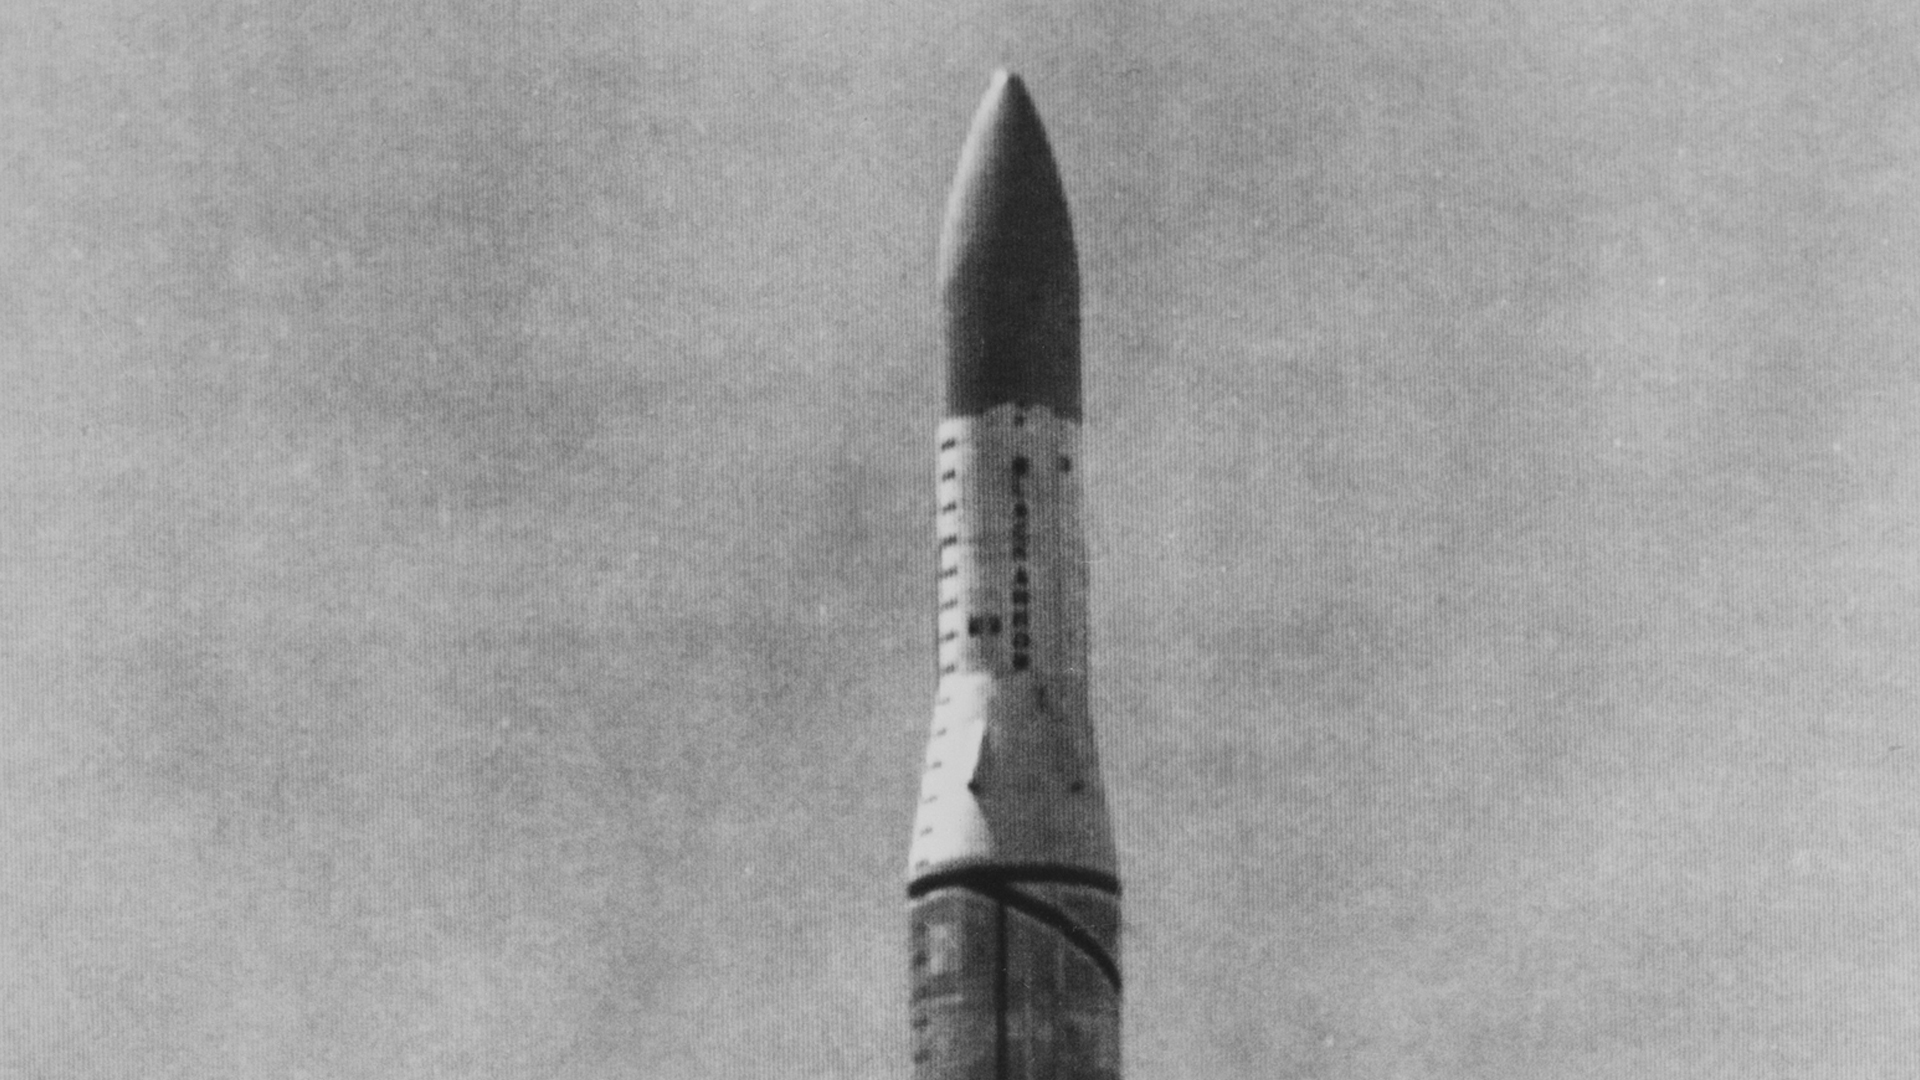 After 50 years, the British space programme is set for re-entry